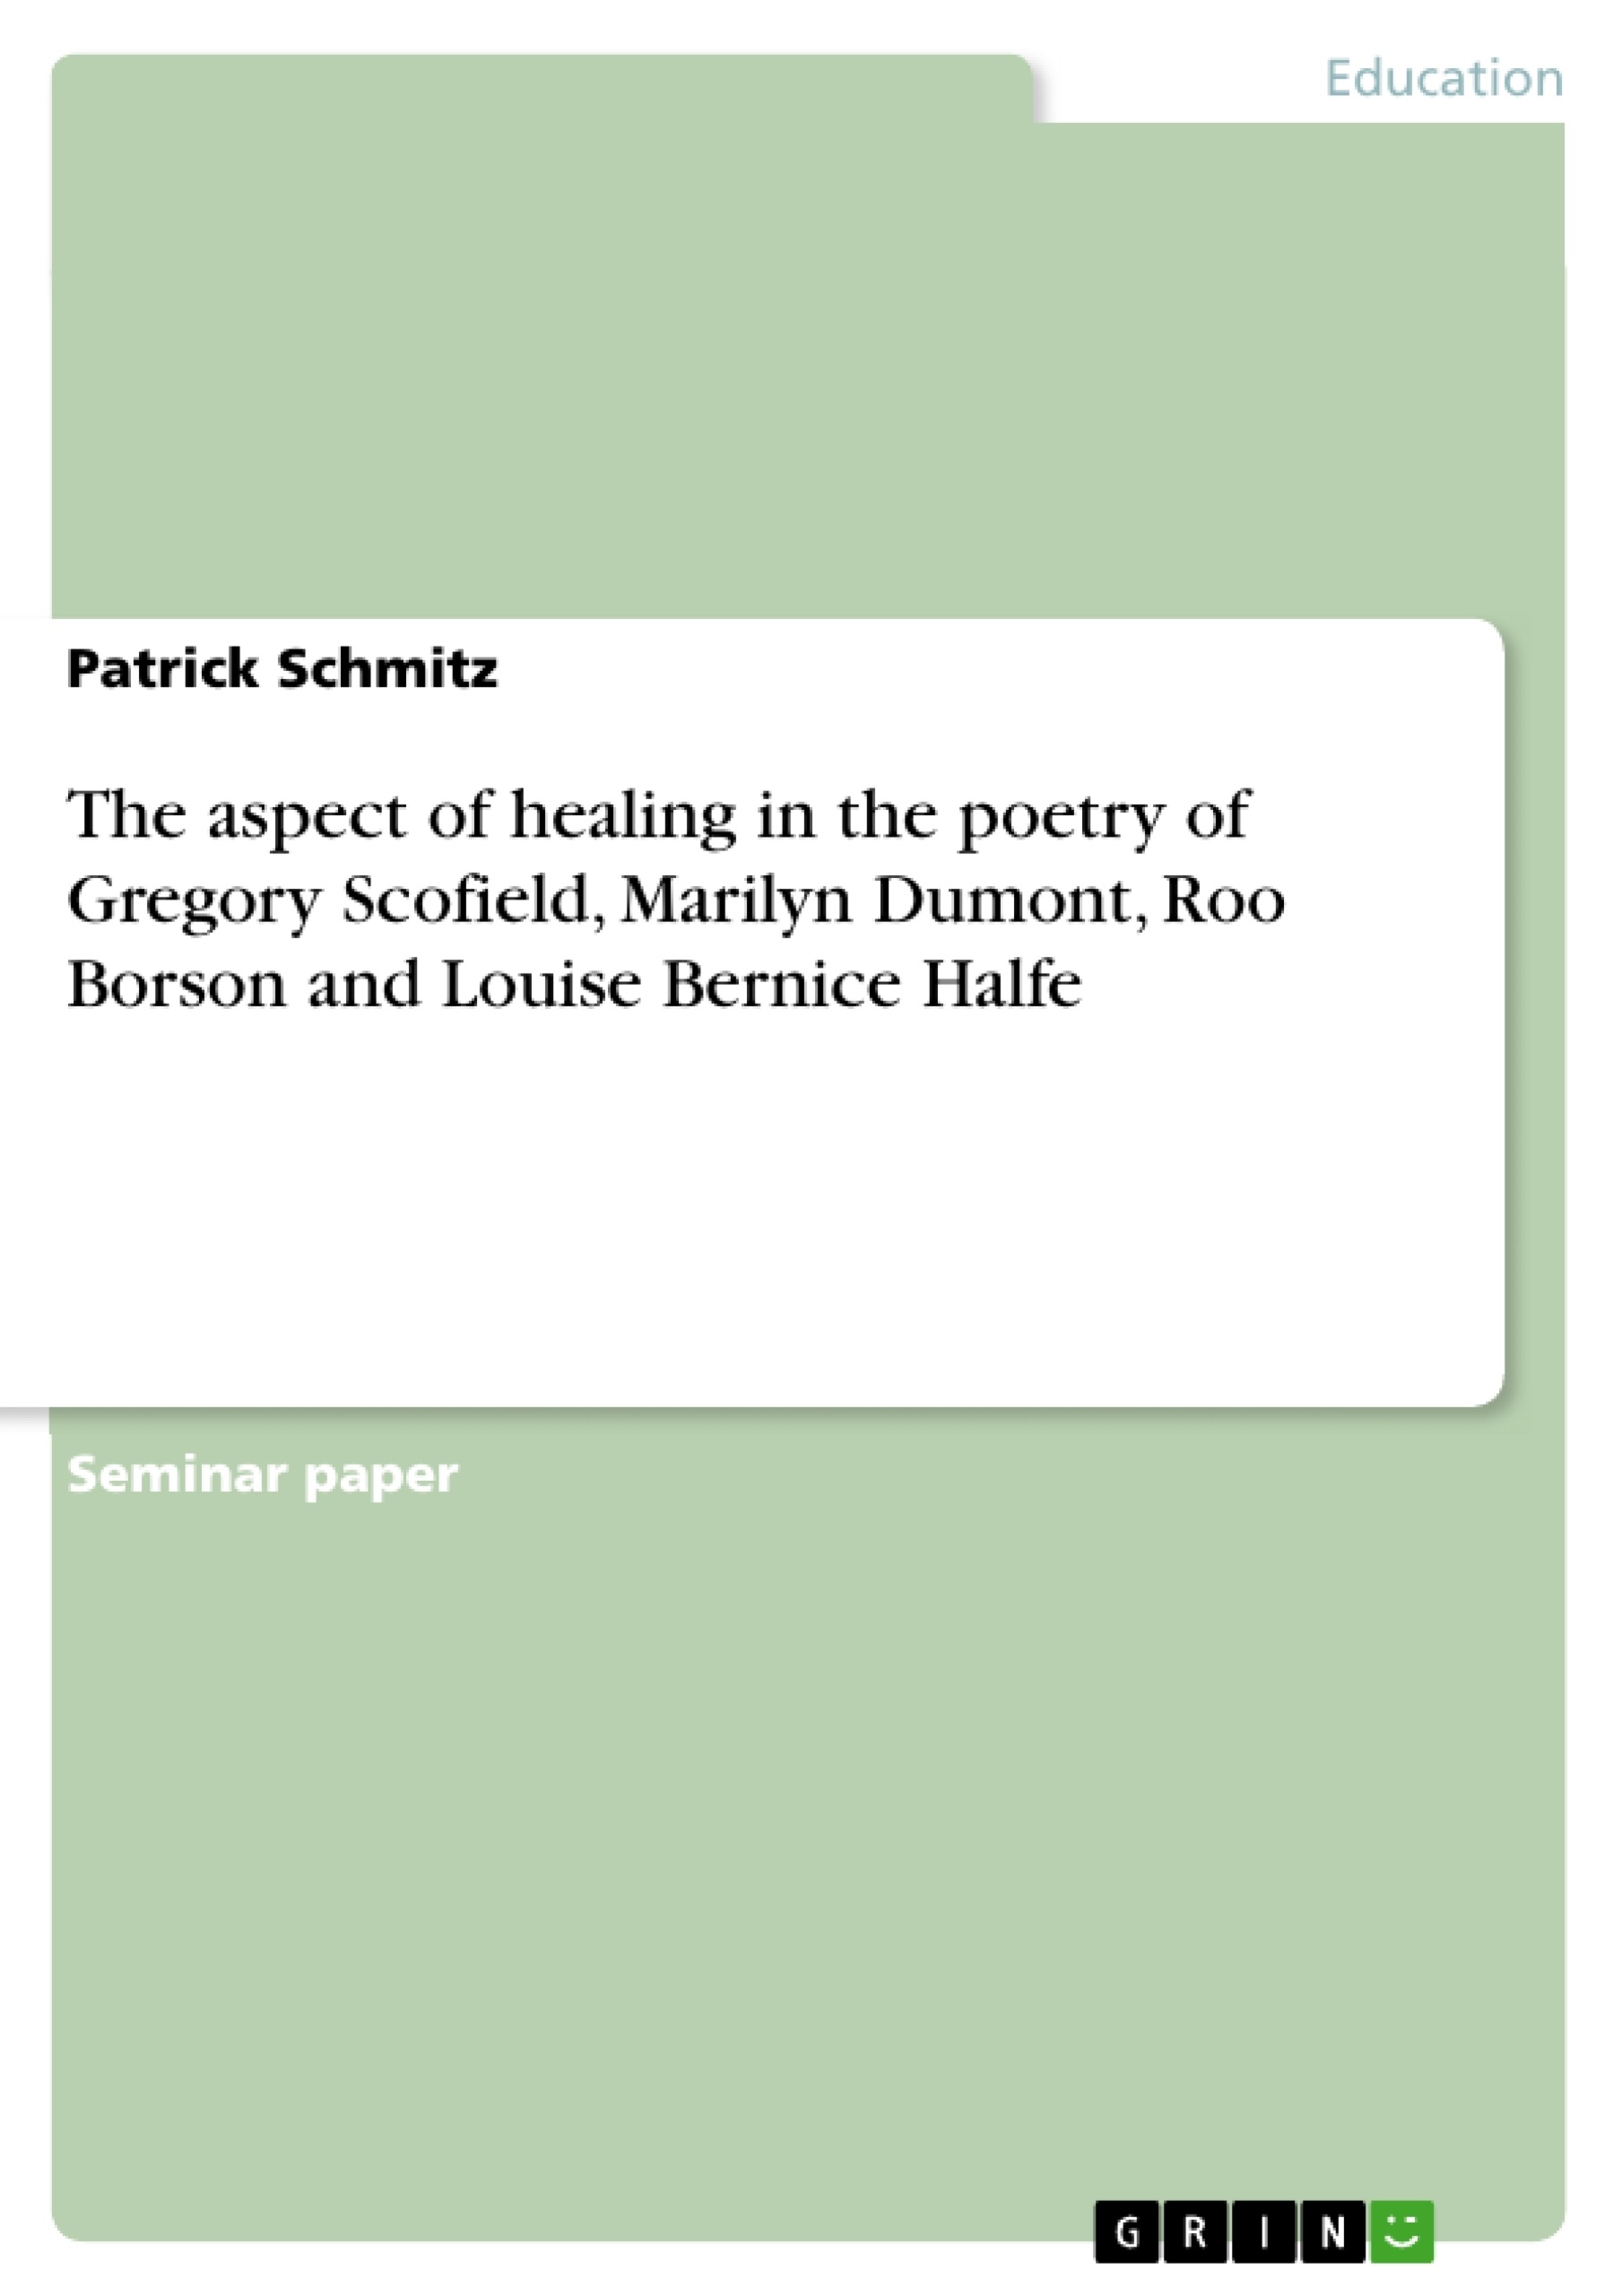 Titre: The aspect of healing in the poetry of Gregory Scofield, Marilyn Dumont, Roo Borson and Louise Bernice Halfe 